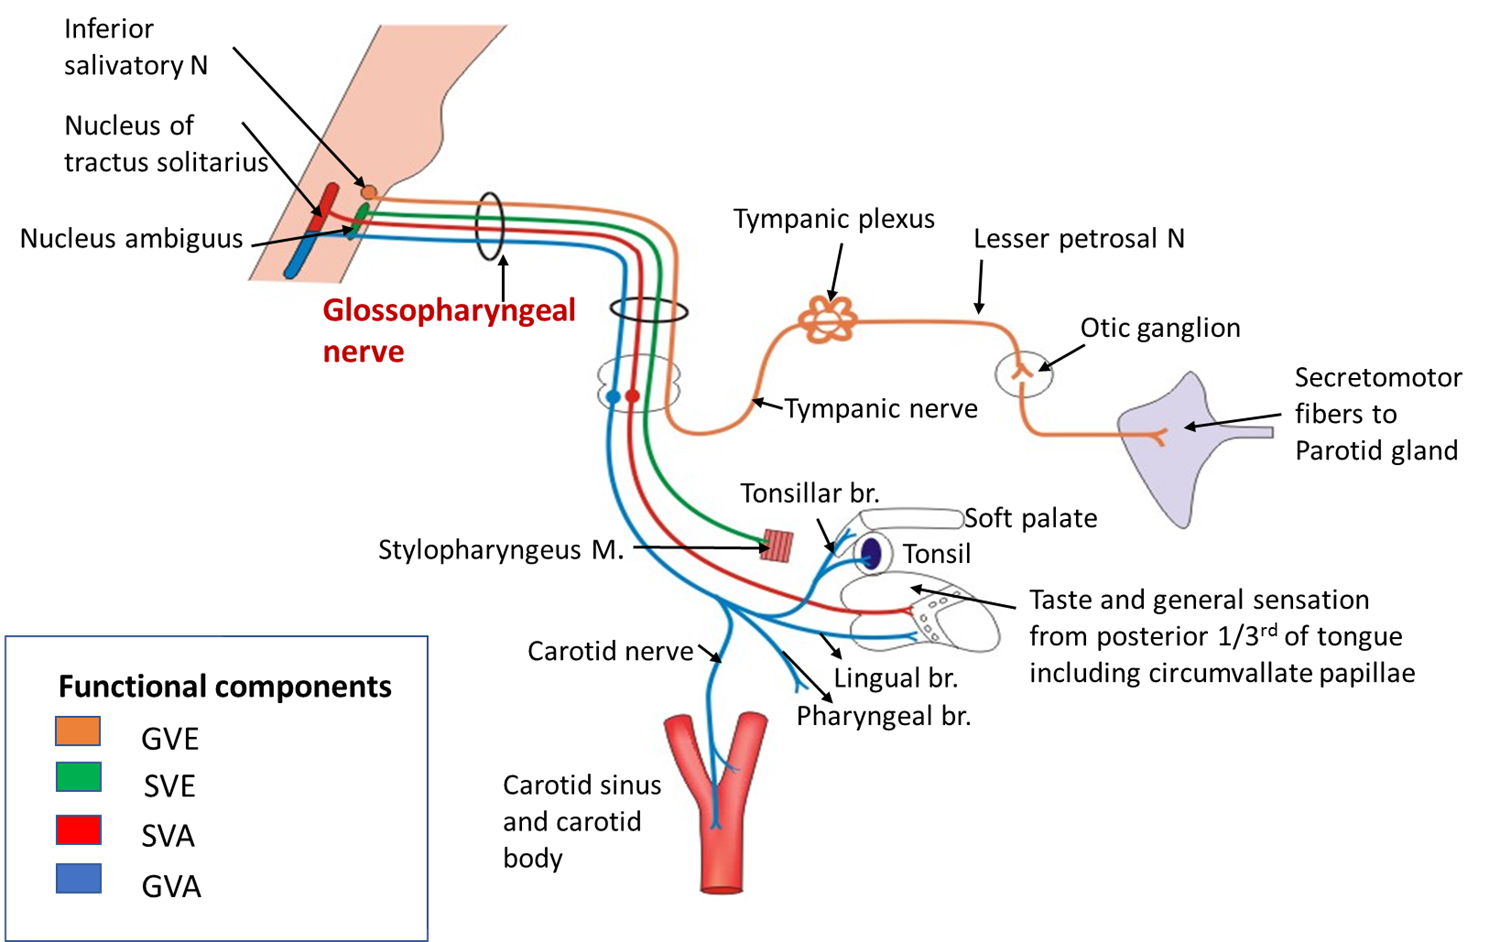 Glossopharyngeal nerve and its branches